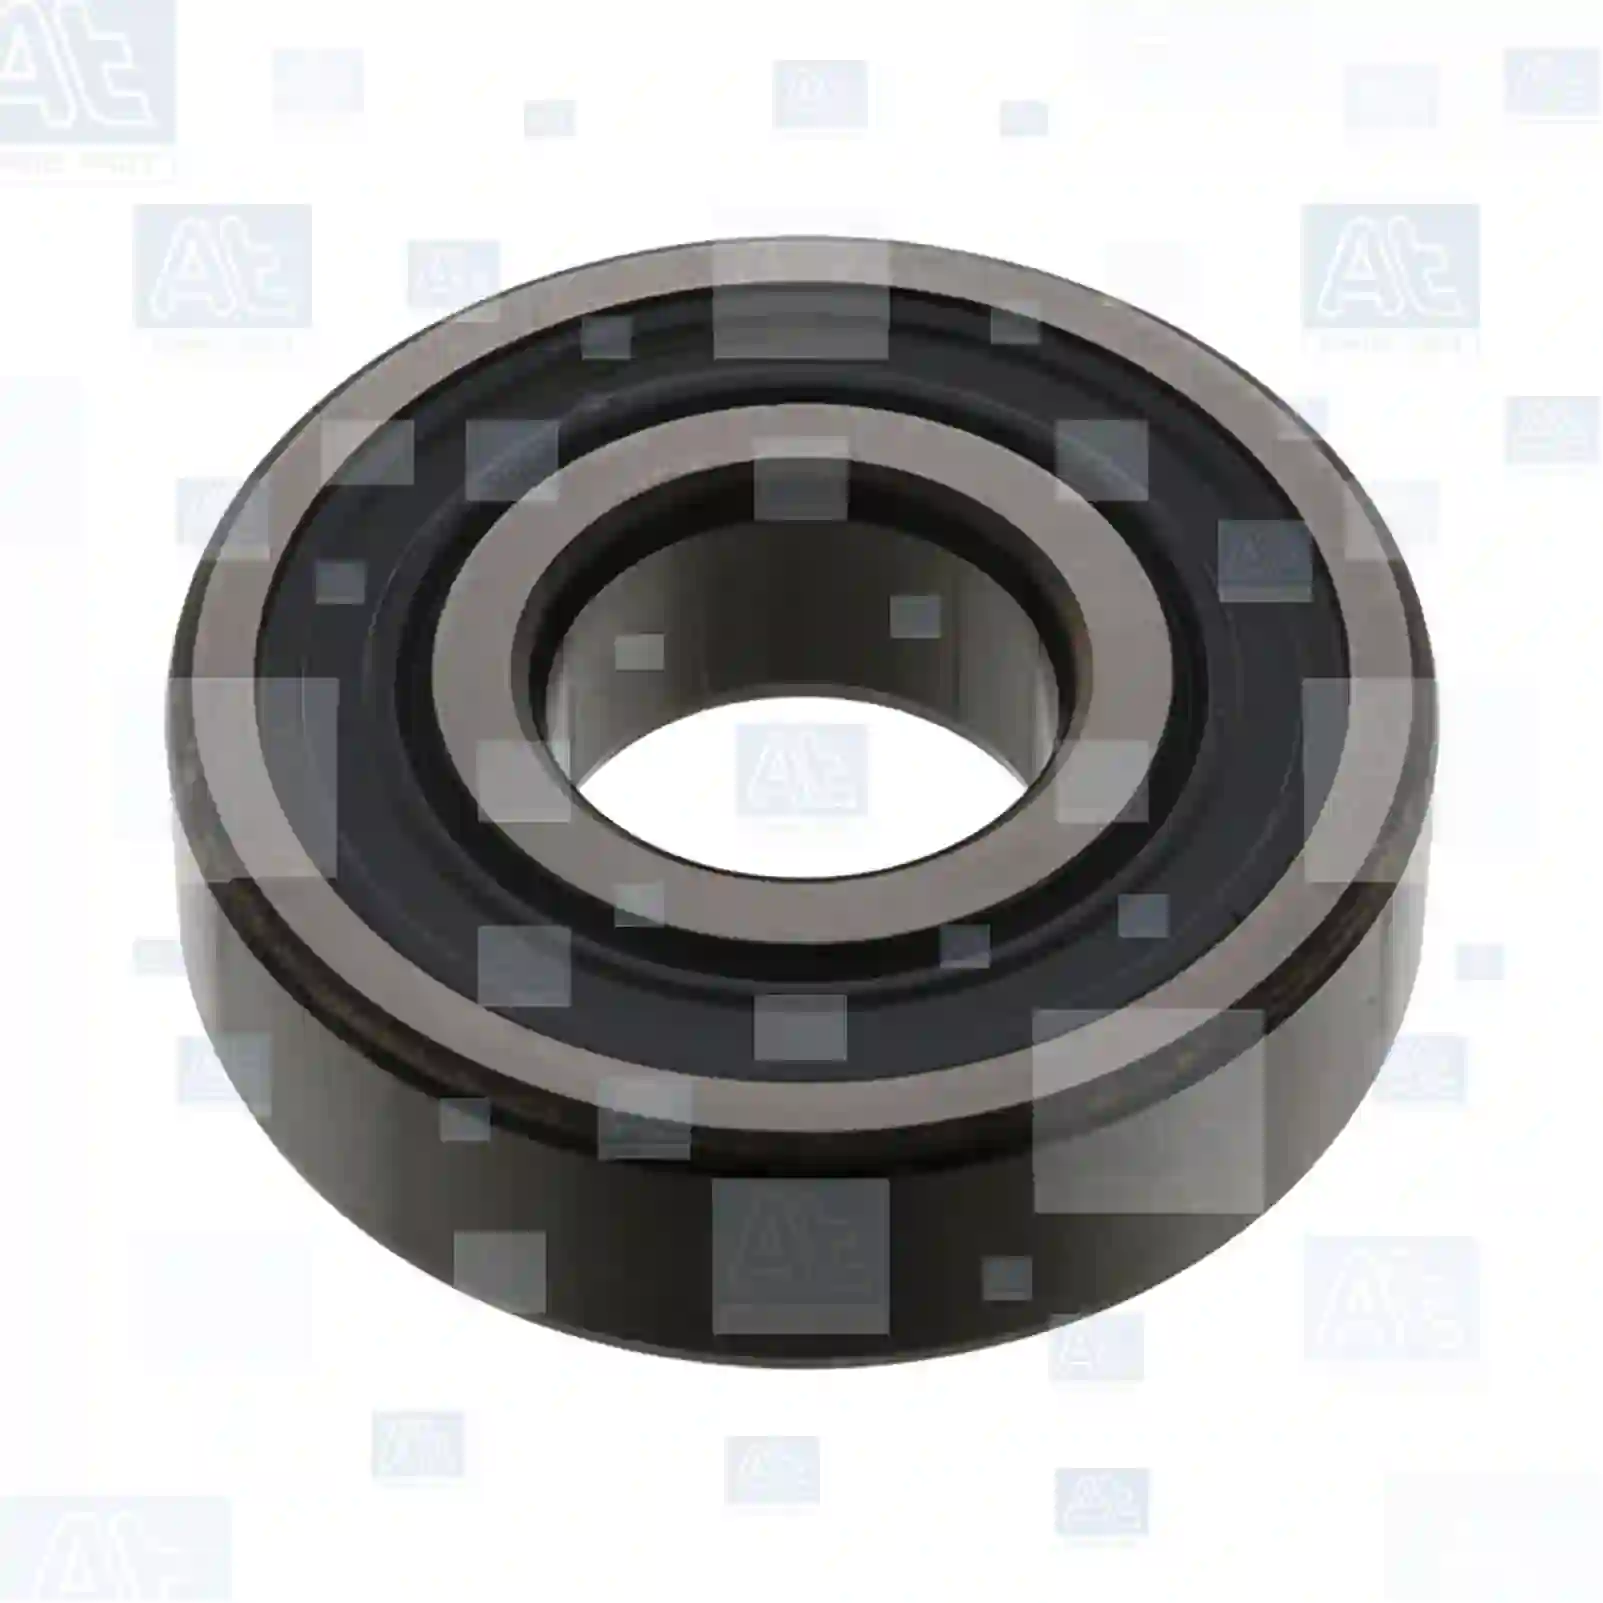 Ball bearing, 77700105, 0521820, 510583, 521820, 619995, 04766077, 500386060, 5010477243, 06314690001, 51934100018, 51934100029, 51934100030, 51934100099, 51934100100, 51934100101, 51934100133, 51934100134, 51934100135, 51934100143, 5010477243, 1313606, 2196742, 258267, 1526189, 1527447, 20796216, 2V5105313, ZG40185-0008 ||  77700105 At Spare Part | Engine, Accelerator Pedal, Camshaft, Connecting Rod, Crankcase, Crankshaft, Cylinder Head, Engine Suspension Mountings, Exhaust Manifold, Exhaust Gas Recirculation, Filter Kits, Flywheel Housing, General Overhaul Kits, Engine, Intake Manifold, Oil Cleaner, Oil Cooler, Oil Filter, Oil Pump, Oil Sump, Piston & Liner, Sensor & Switch, Timing Case, Turbocharger, Cooling System, Belt Tensioner, Coolant Filter, Coolant Pipe, Corrosion Prevention Agent, Drive, Expansion Tank, Fan, Intercooler, Monitors & Gauges, Radiator, Thermostat, V-Belt / Timing belt, Water Pump, Fuel System, Electronical Injector Unit, Feed Pump, Fuel Filter, cpl., Fuel Gauge Sender,  Fuel Line, Fuel Pump, Fuel Tank, Injection Line Kit, Injection Pump, Exhaust System, Clutch & Pedal, Gearbox, Propeller Shaft, Axles, Brake System, Hubs & Wheels, Suspension, Leaf Spring, Universal Parts / Accessories, Steering, Electrical System, Cabin Ball bearing, 77700105, 0521820, 510583, 521820, 619995, 04766077, 500386060, 5010477243, 06314690001, 51934100018, 51934100029, 51934100030, 51934100099, 51934100100, 51934100101, 51934100133, 51934100134, 51934100135, 51934100143, 5010477243, 1313606, 2196742, 258267, 1526189, 1527447, 20796216, 2V5105313, ZG40185-0008 ||  77700105 At Spare Part | Engine, Accelerator Pedal, Camshaft, Connecting Rod, Crankcase, Crankshaft, Cylinder Head, Engine Suspension Mountings, Exhaust Manifold, Exhaust Gas Recirculation, Filter Kits, Flywheel Housing, General Overhaul Kits, Engine, Intake Manifold, Oil Cleaner, Oil Cooler, Oil Filter, Oil Pump, Oil Sump, Piston & Liner, Sensor & Switch, Timing Case, Turbocharger, Cooling System, Belt Tensioner, Coolant Filter, Coolant Pipe, Corrosion Prevention Agent, Drive, Expansion Tank, Fan, Intercooler, Monitors & Gauges, Radiator, Thermostat, V-Belt / Timing belt, Water Pump, Fuel System, Electronical Injector Unit, Feed Pump, Fuel Filter, cpl., Fuel Gauge Sender,  Fuel Line, Fuel Pump, Fuel Tank, Injection Line Kit, Injection Pump, Exhaust System, Clutch & Pedal, Gearbox, Propeller Shaft, Axles, Brake System, Hubs & Wheels, Suspension, Leaf Spring, Universal Parts / Accessories, Steering, Electrical System, Cabin